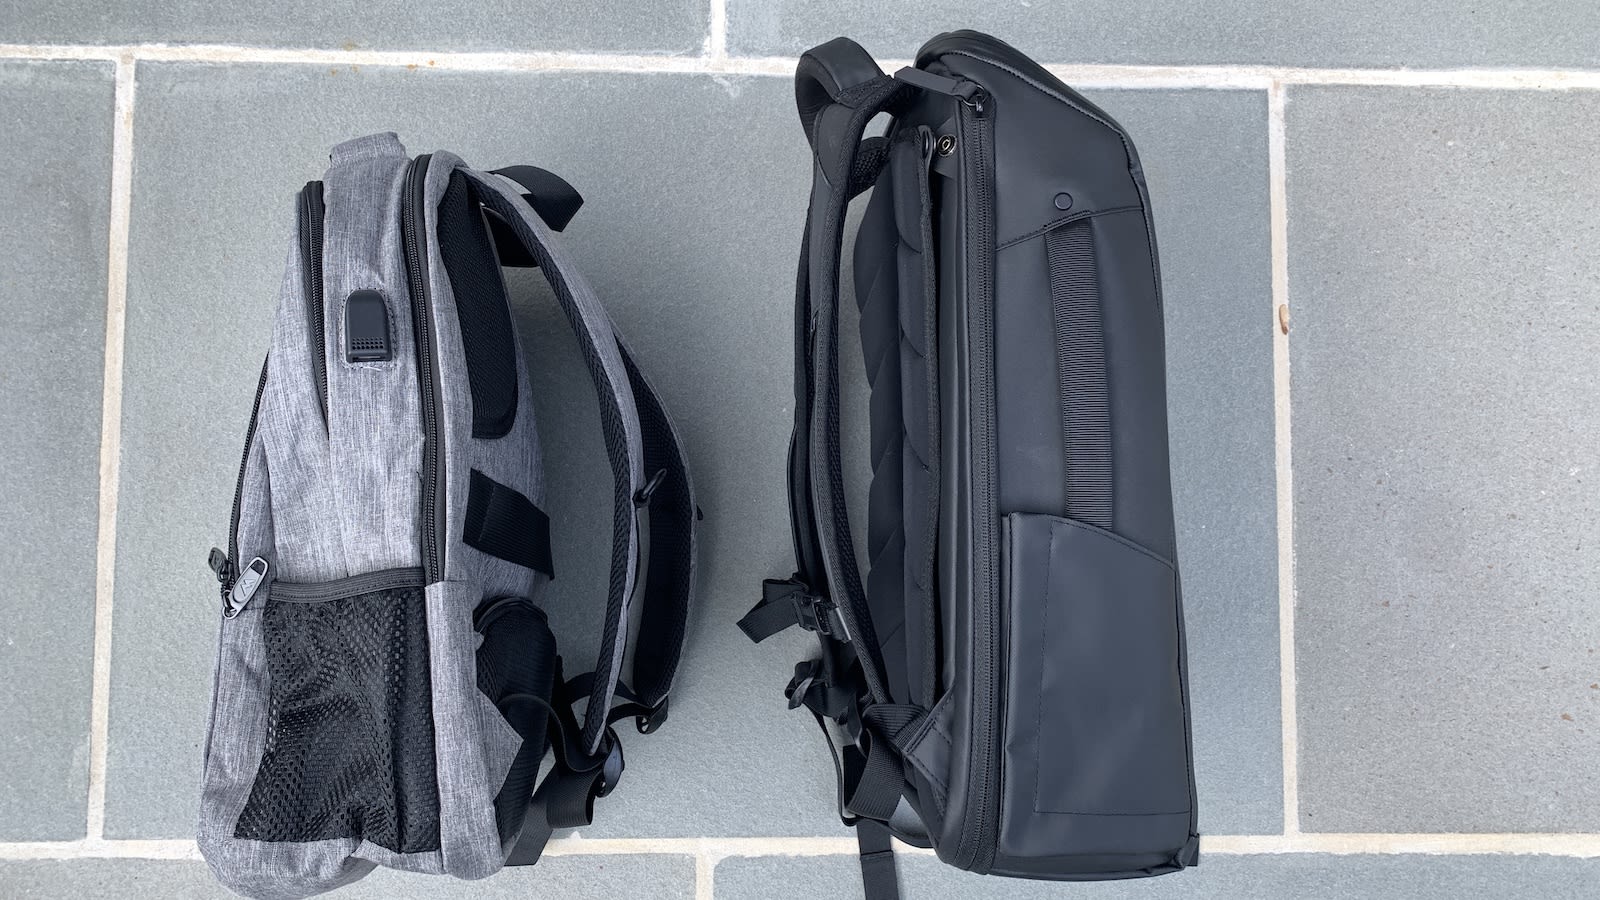 Nomatic vs. Matein: Which is the better travel backpack?